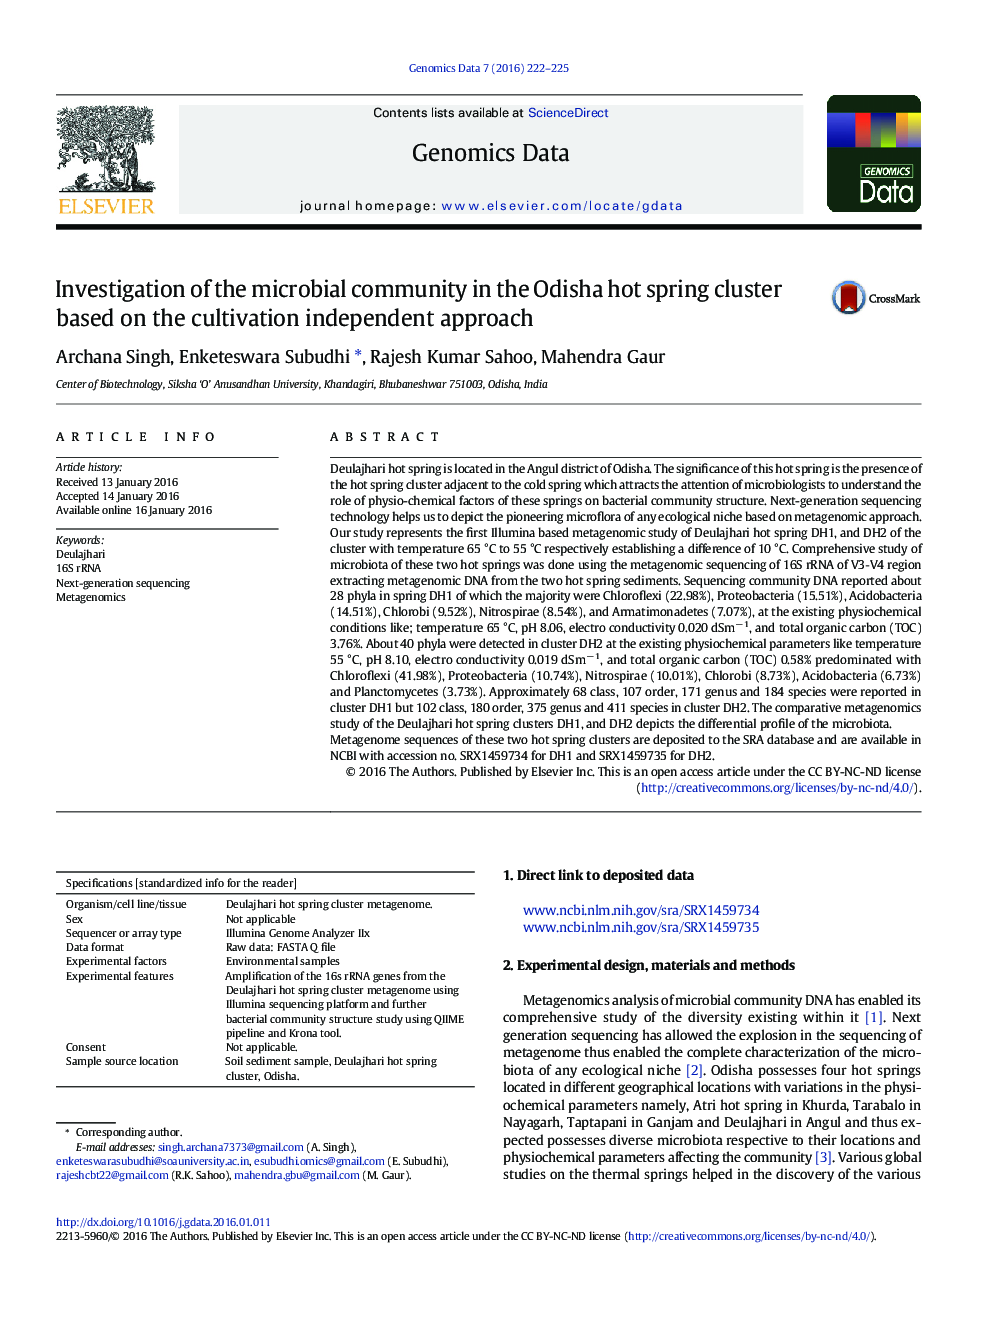 Investigation of the microbial community in the Odisha hot spring cluster based on the cultivation independent approach